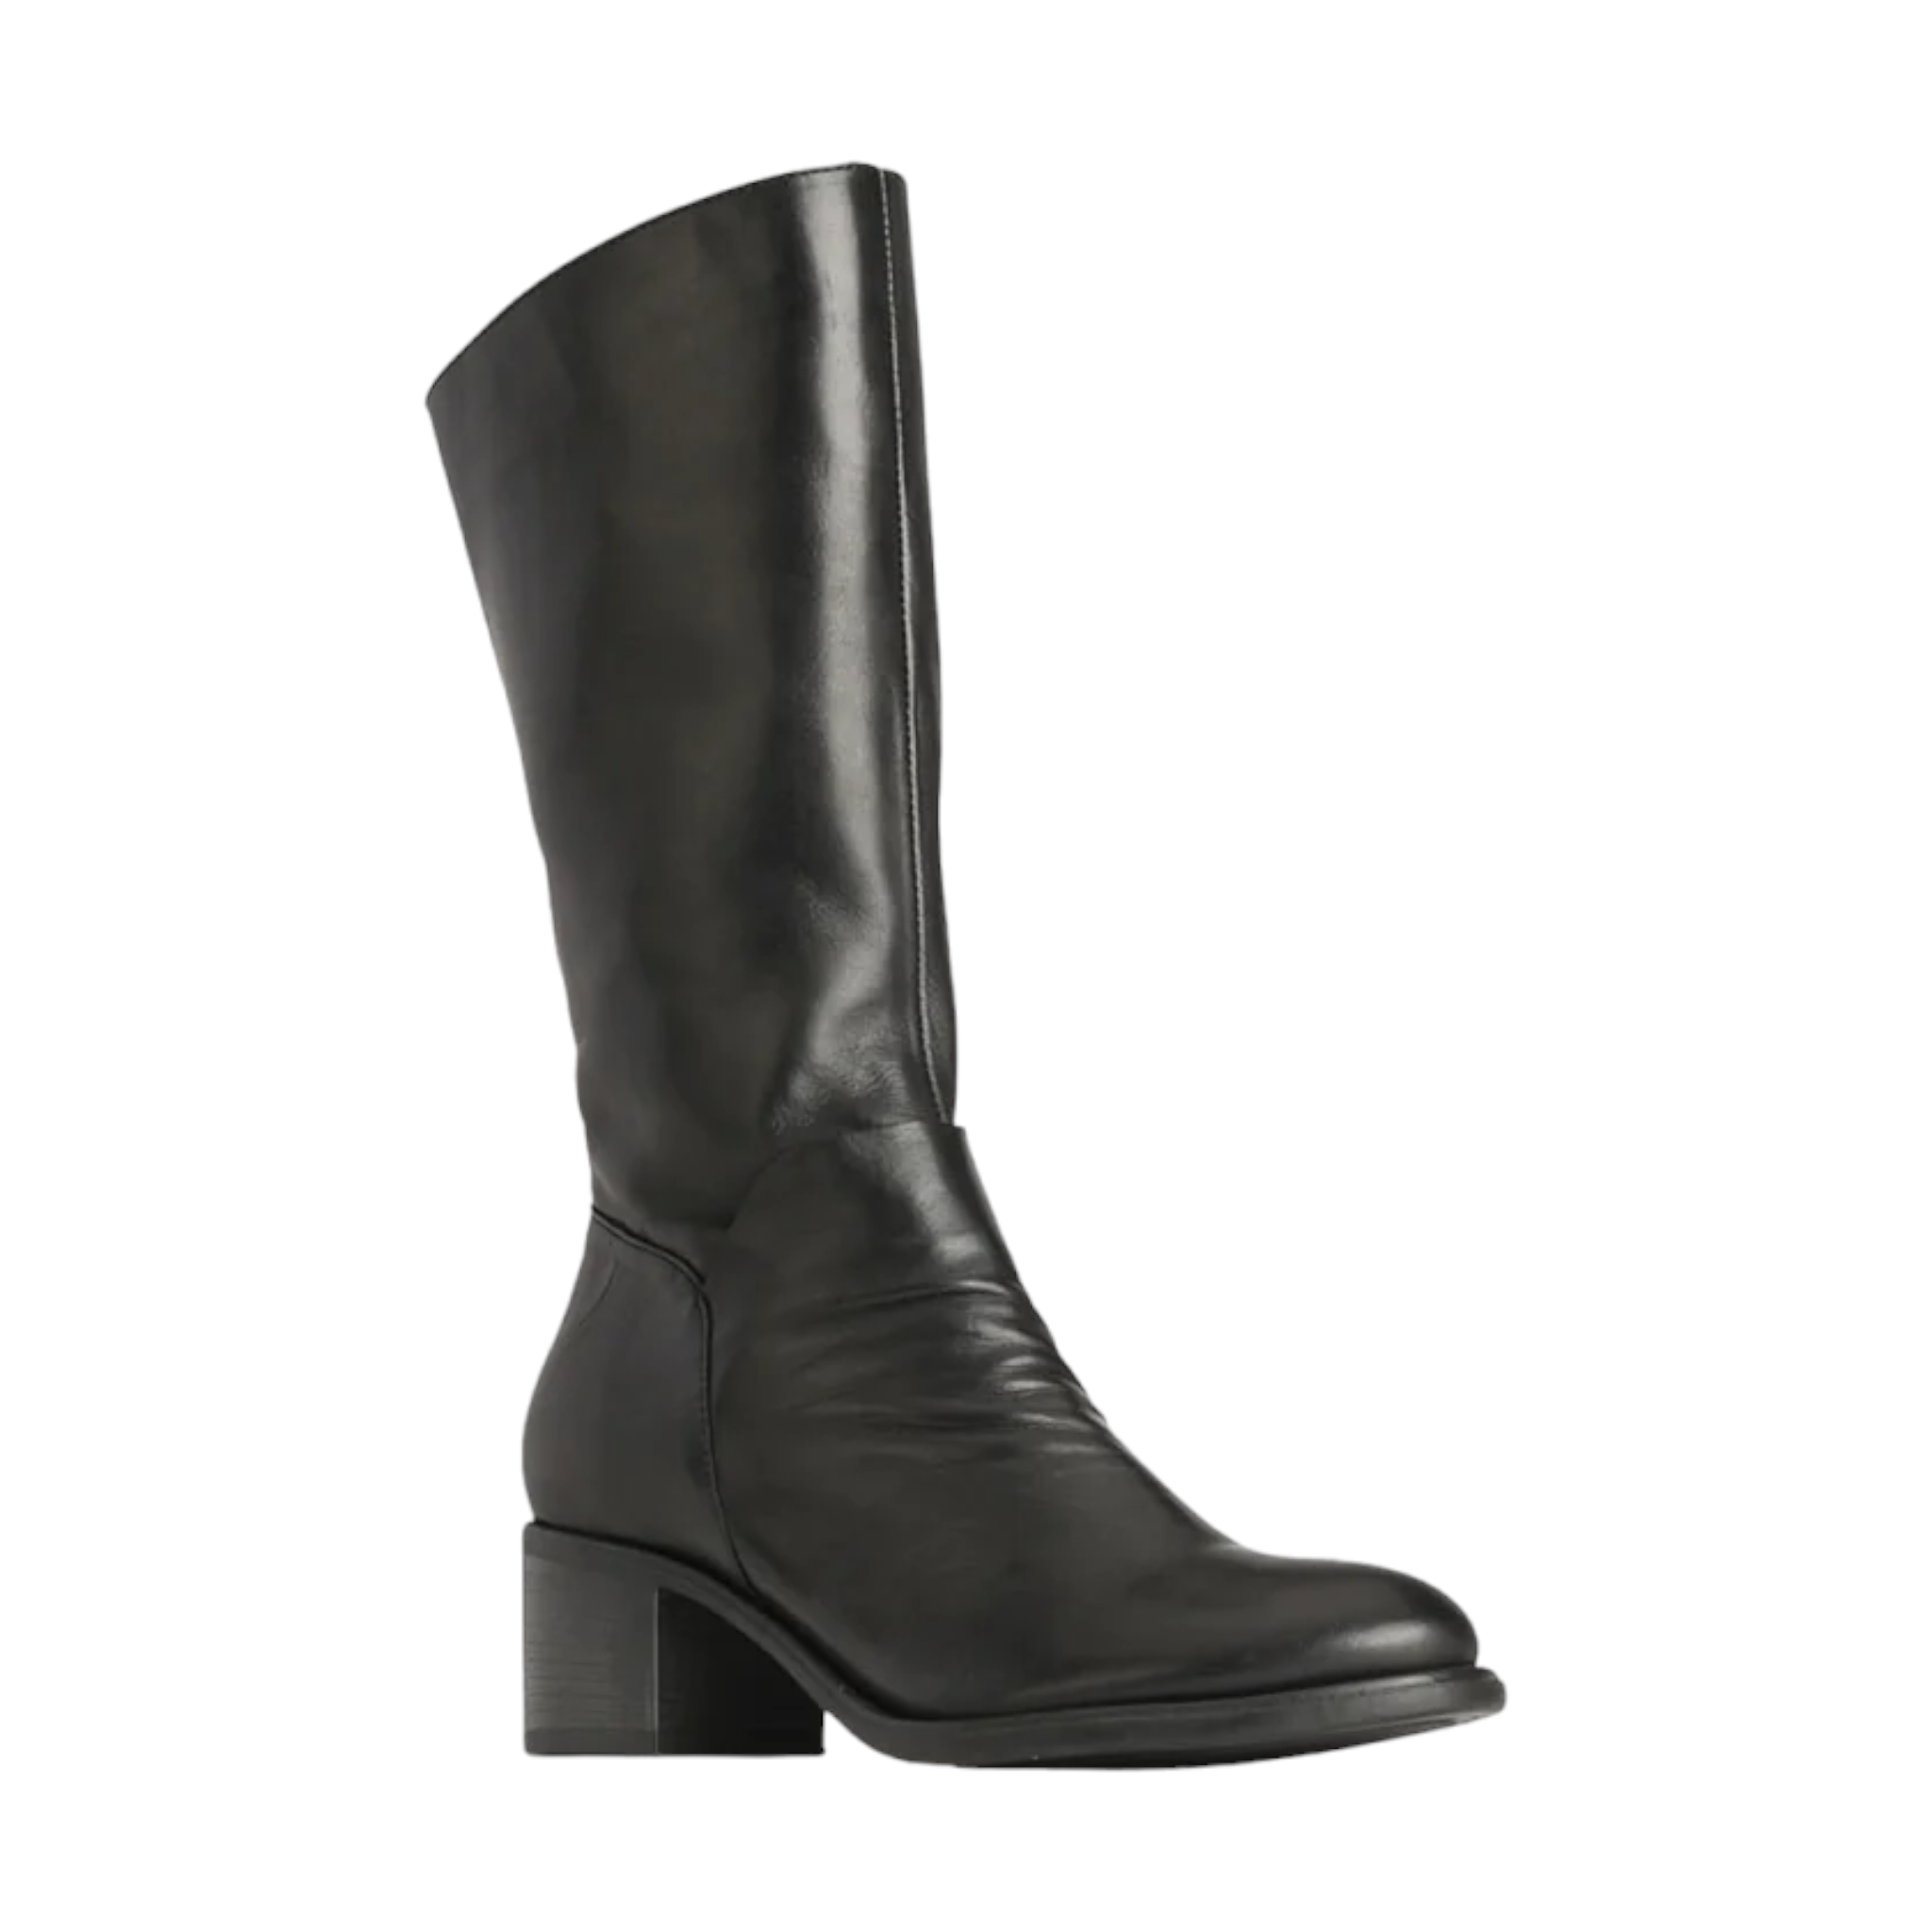 Shop Rochelle EOS - with shoe&amp;me - from EOS - Boots - Boot, Winter, Womens - [collection]